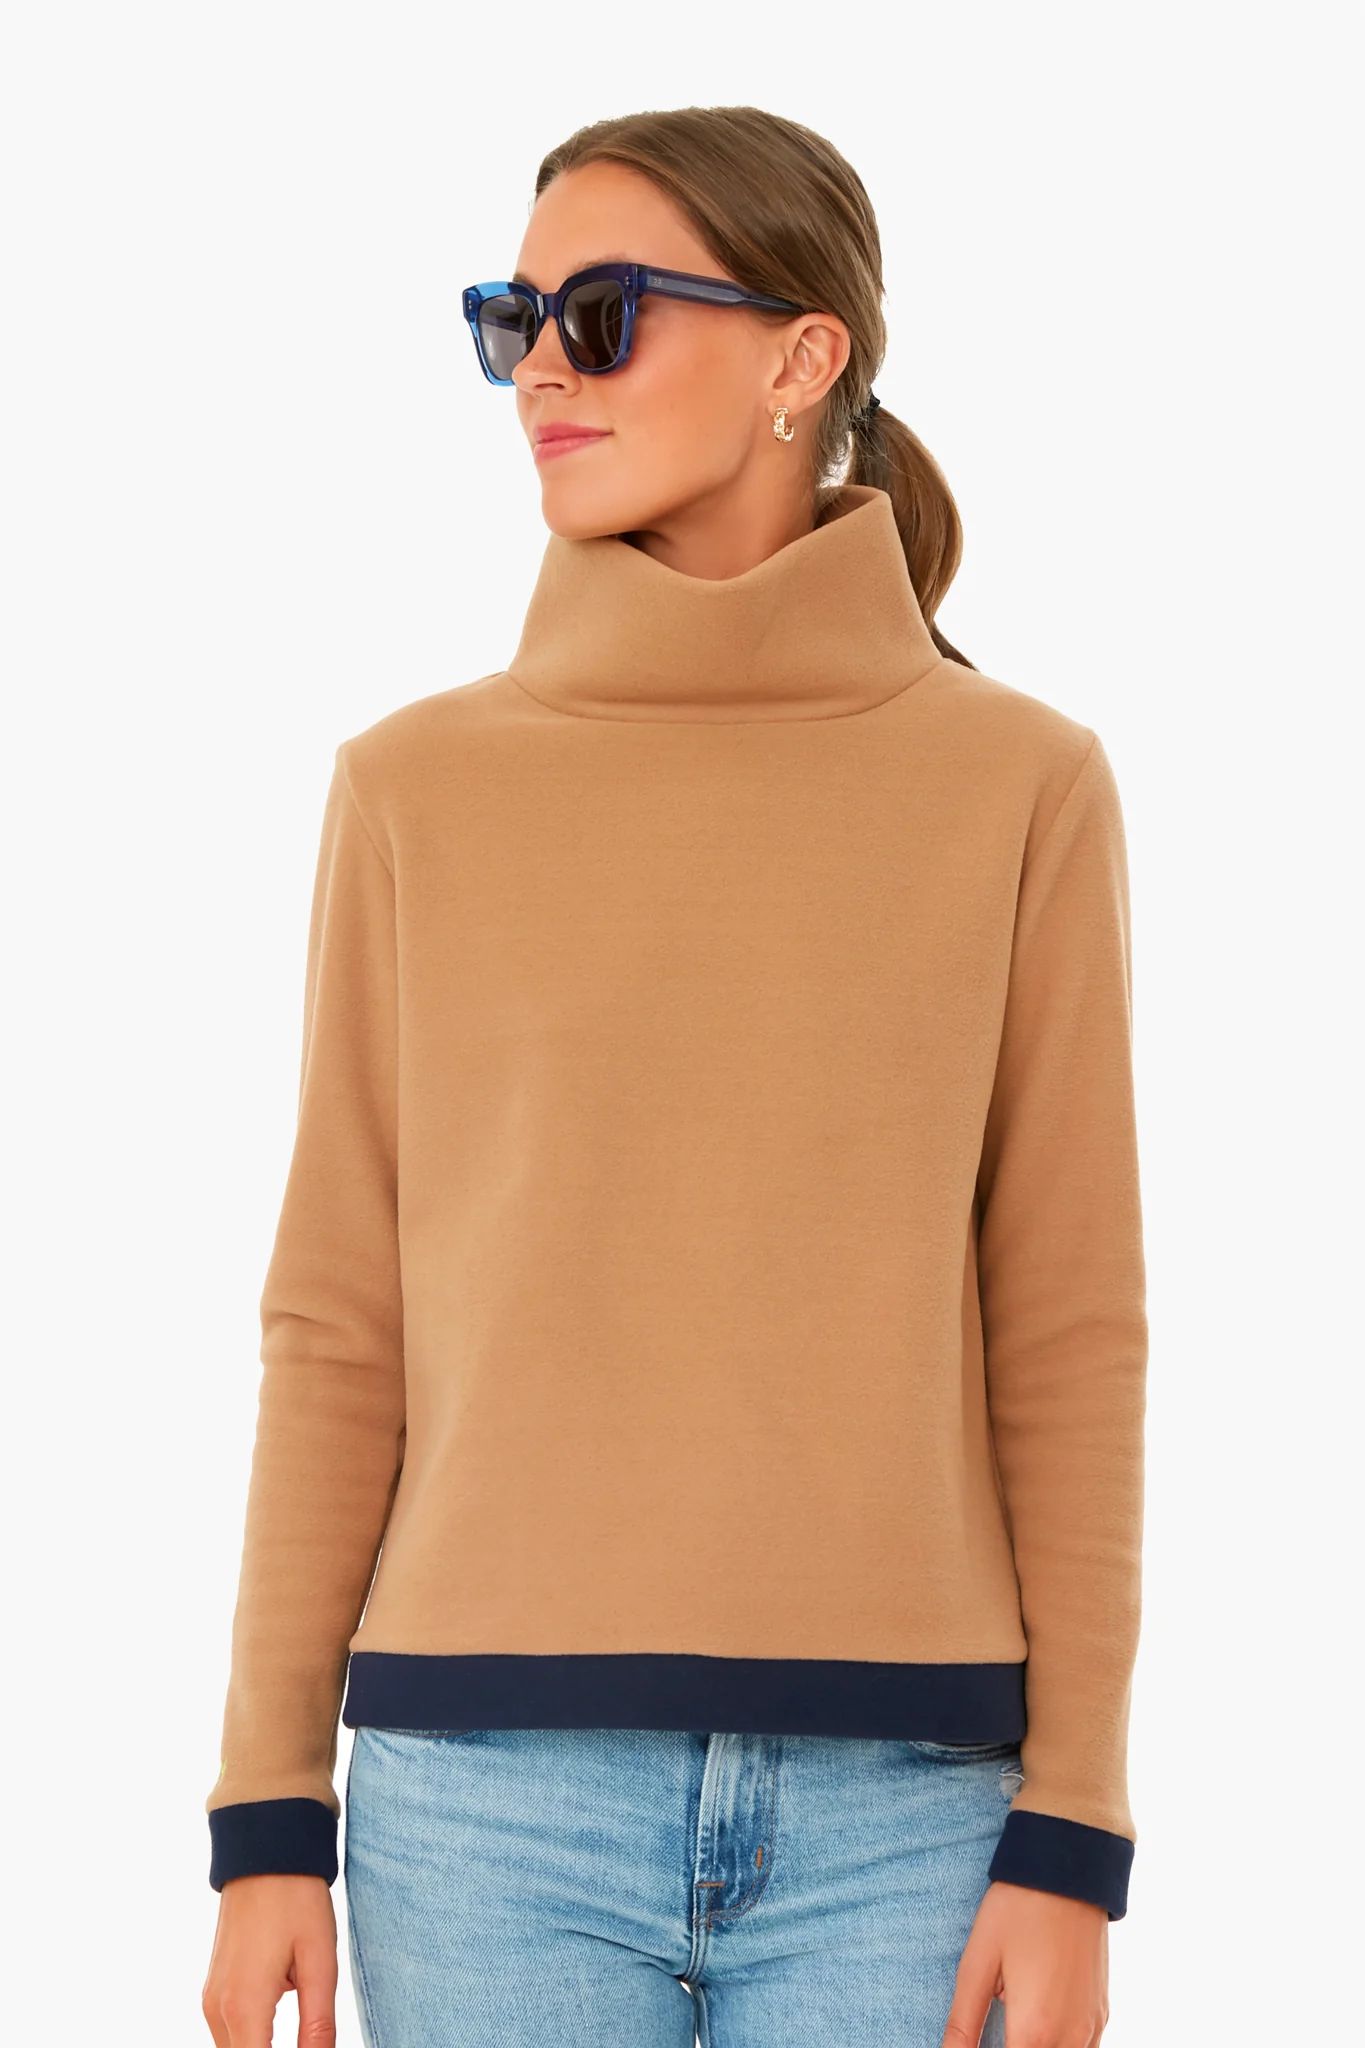 Camel and Navy Colorblock Park Slope | Tuckernuck (US)